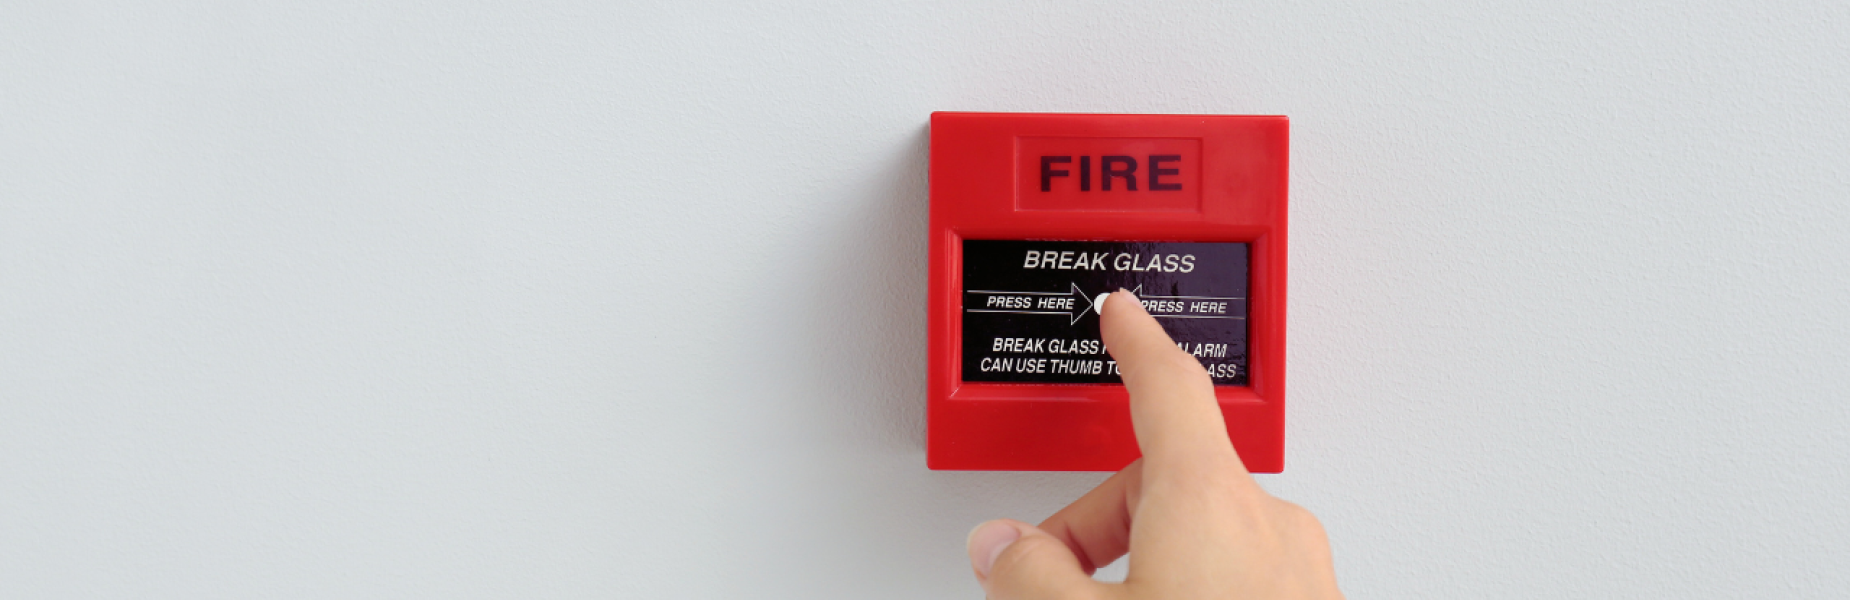 Fire alarm on a white wall